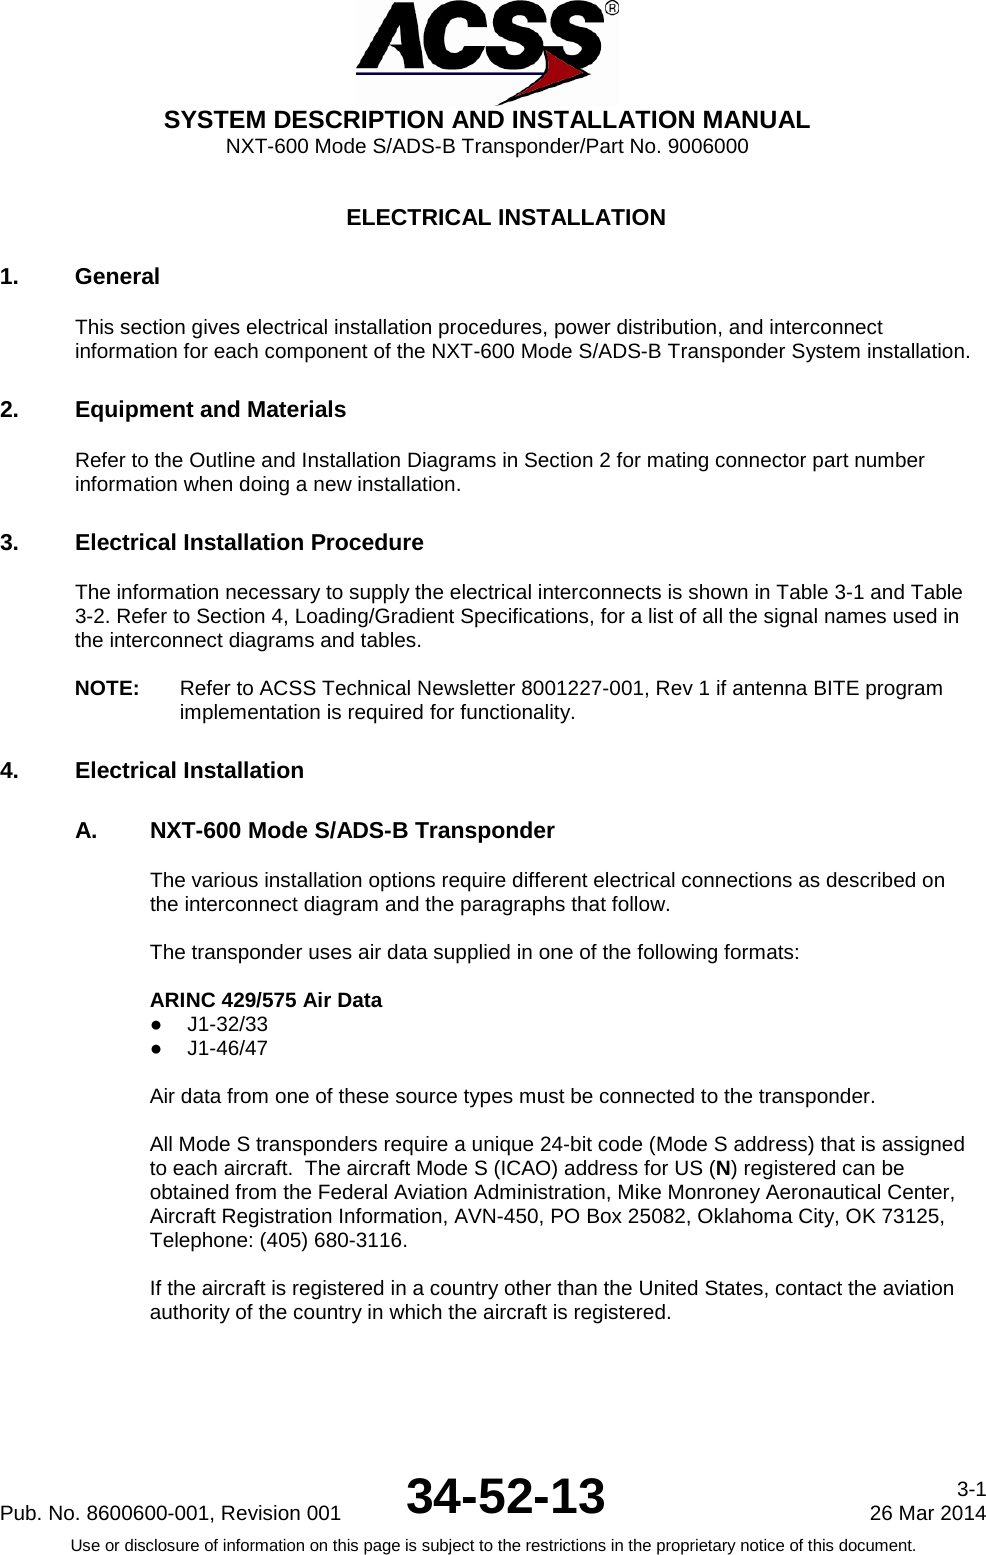  SYSTEM DESCRIPTION AND INSTALLATION MANUAL NXT-600 Mode S/ADS-B Transponder/Part No. 9006000  ELECTRICAL INSTALLATION 1. General This section gives electrical installation procedures, power distribution, and interconnect information for each component of the NXT-600 Mode S/ADS-B Transponder System installation. 2. Equipment and Materials Refer to the Outline and Installation Diagrams in Section 2 for mating connector part number information when doing a new installation. 3. Electrical Installation Procedure The information necessary to supply the electrical interconnects is shown in Table 3-1 and Table 3-2. Refer to Section 4, Loading/Gradient Specifications, for a list of all the signal names used in the interconnect diagrams and tables.  NOTE:  Refer to ACSS Technical Newsletter 8001227-001, Rev 1 if antenna BITE program implementation is required for functionality. 4. Electrical Installation A. NXT-600 Mode S/ADS-B Transponder The various installation options require different electrical connections as described on the interconnect diagram and the paragraphs that follow.  The transponder uses air data supplied in one of the following formats:  ARINC 429/575 Air Data ● J1-32/33 ● J1-46/47  Air data from one of these source types must be connected to the transponder.    All Mode S transponders require a unique 24-bit code (Mode S address) that is assigned to each aircraft.  The aircraft Mode S (ICAO) address for US (N) registered can be obtained from the Federal Aviation Administration, Mike Monroney Aeronautical Center, Aircraft Registration Information, AVN-450, PO Box 25082, Oklahoma City, OK 73125, Telephone: (405) 680-3116.  If the aircraft is registered in a country other than the United States, contact the aviation authority of the country in which the aircraft is registered.  Pub. No. 8600600-001, Revision 001 34-52-13 3-1 26 Mar 2014 Use or disclosure of information on this page is subject to the restrictions in the proprietary notice of this document.  